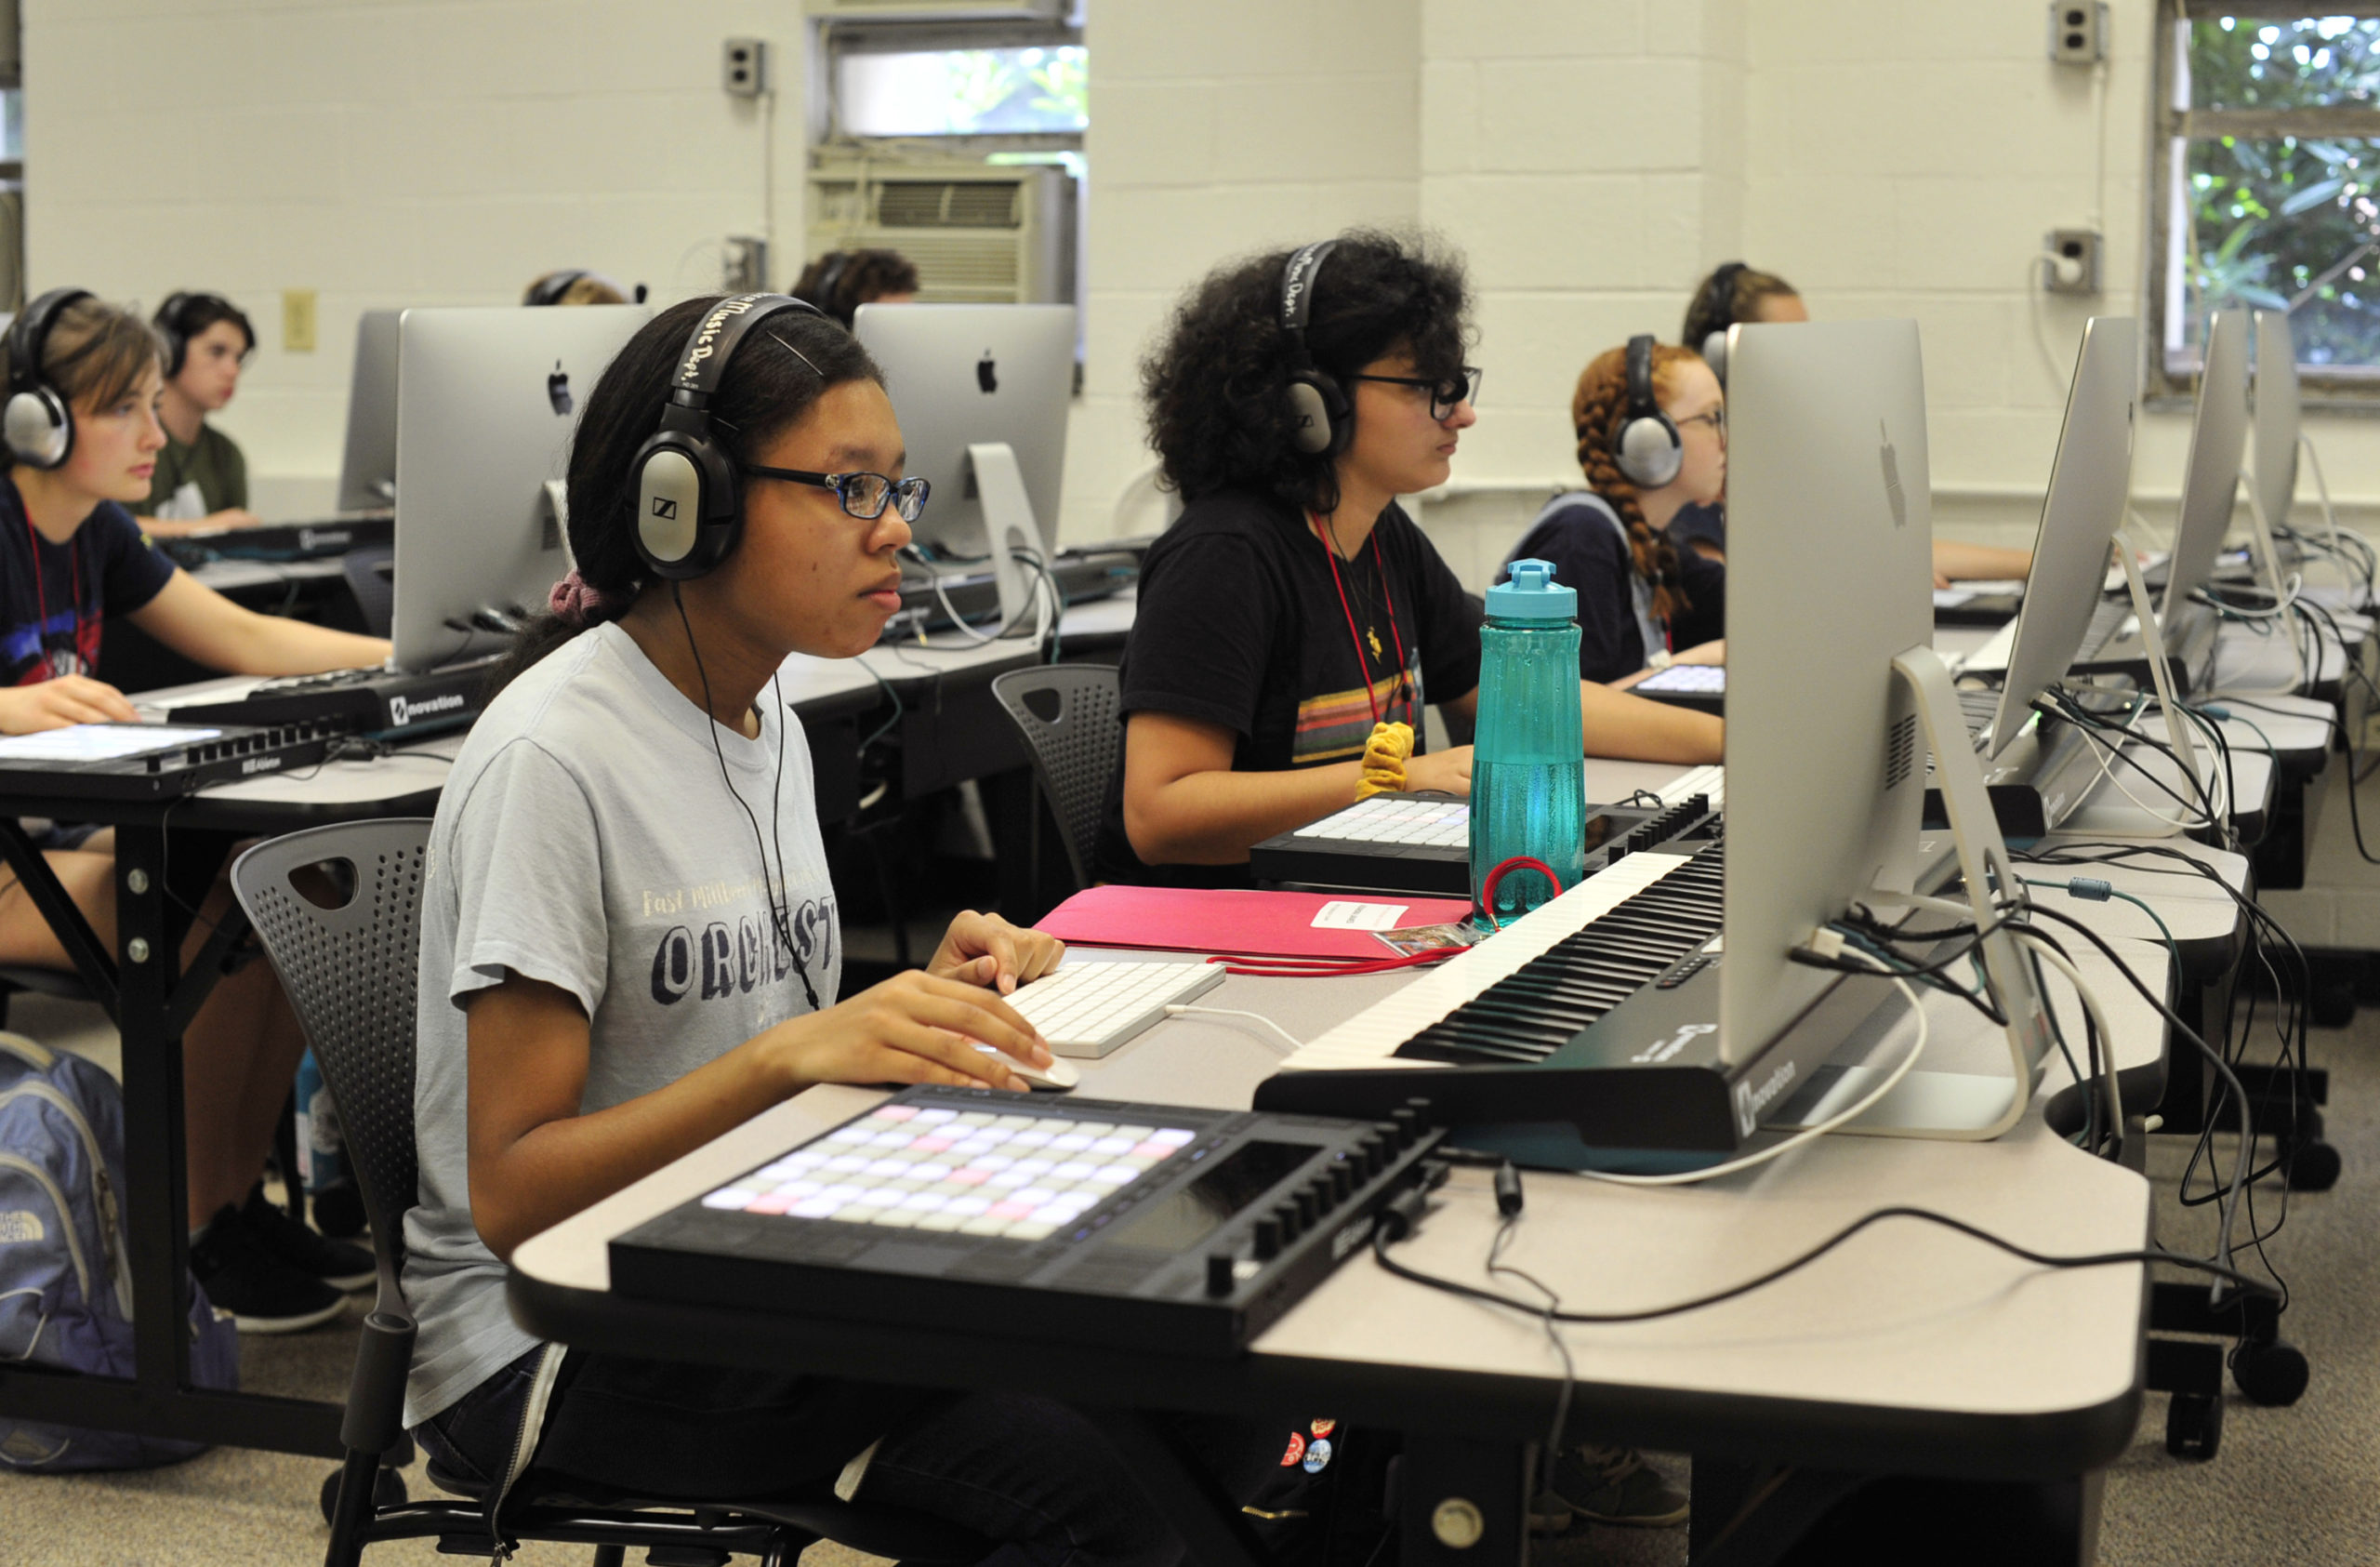 Students wearing headphones work on electronic music compositions in a computer lab equipped with music keyboards and midi controllers.